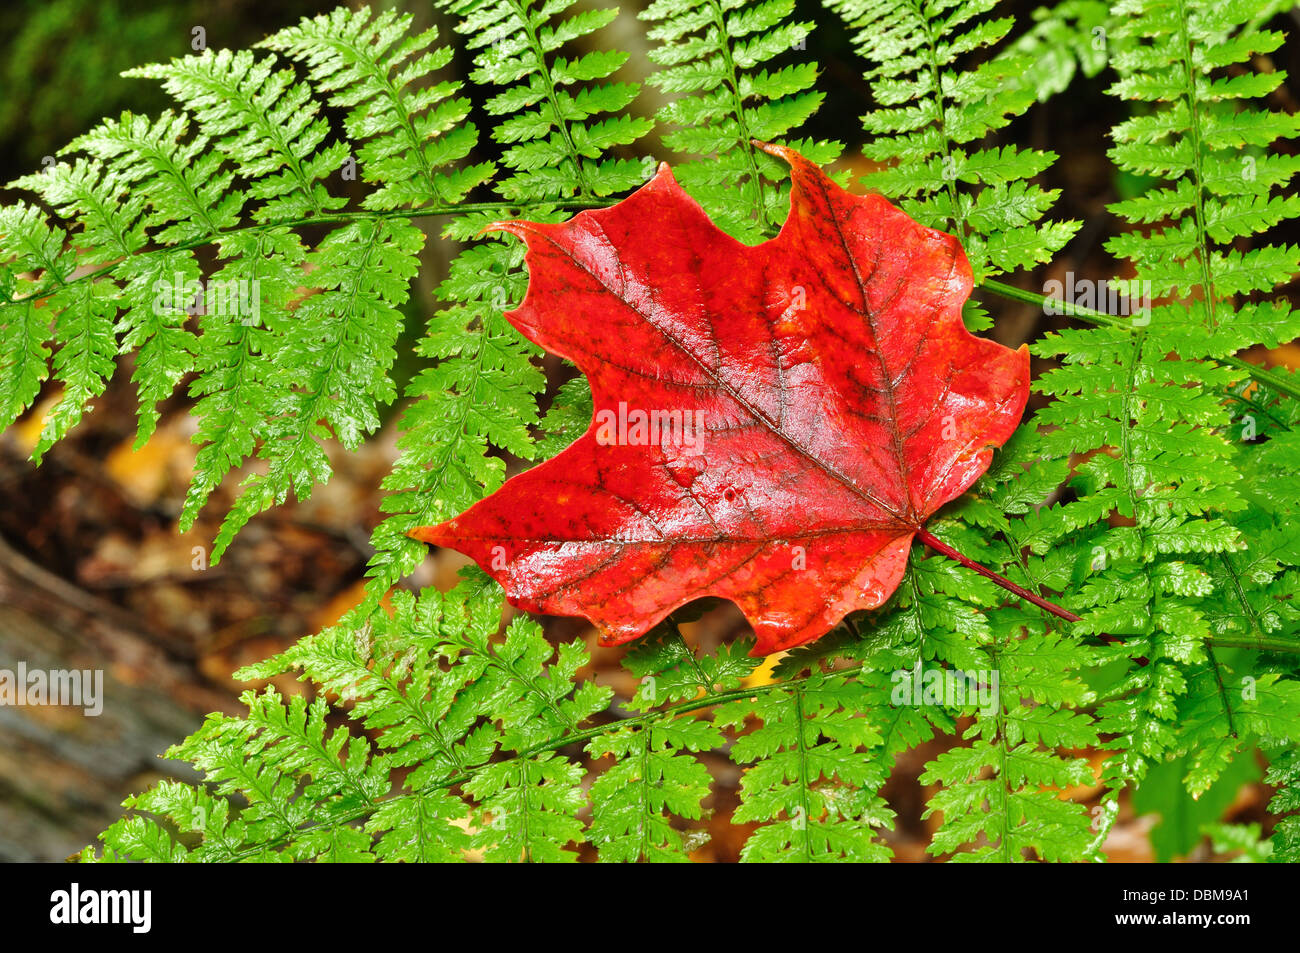 Red Maple leaf on a green fern Stock Photo